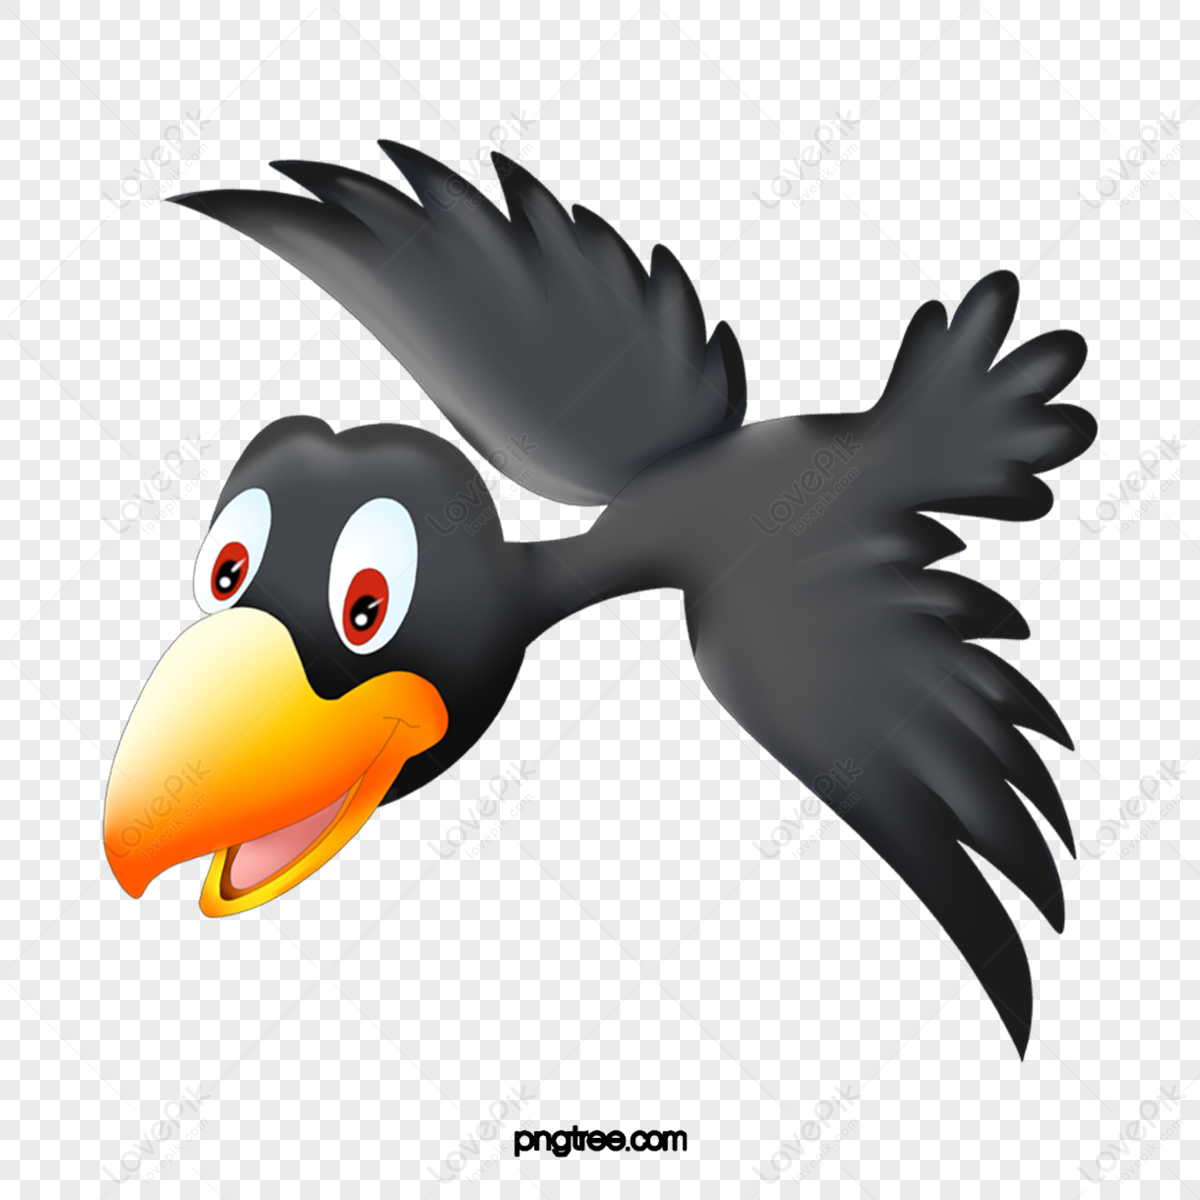 crows clipart free